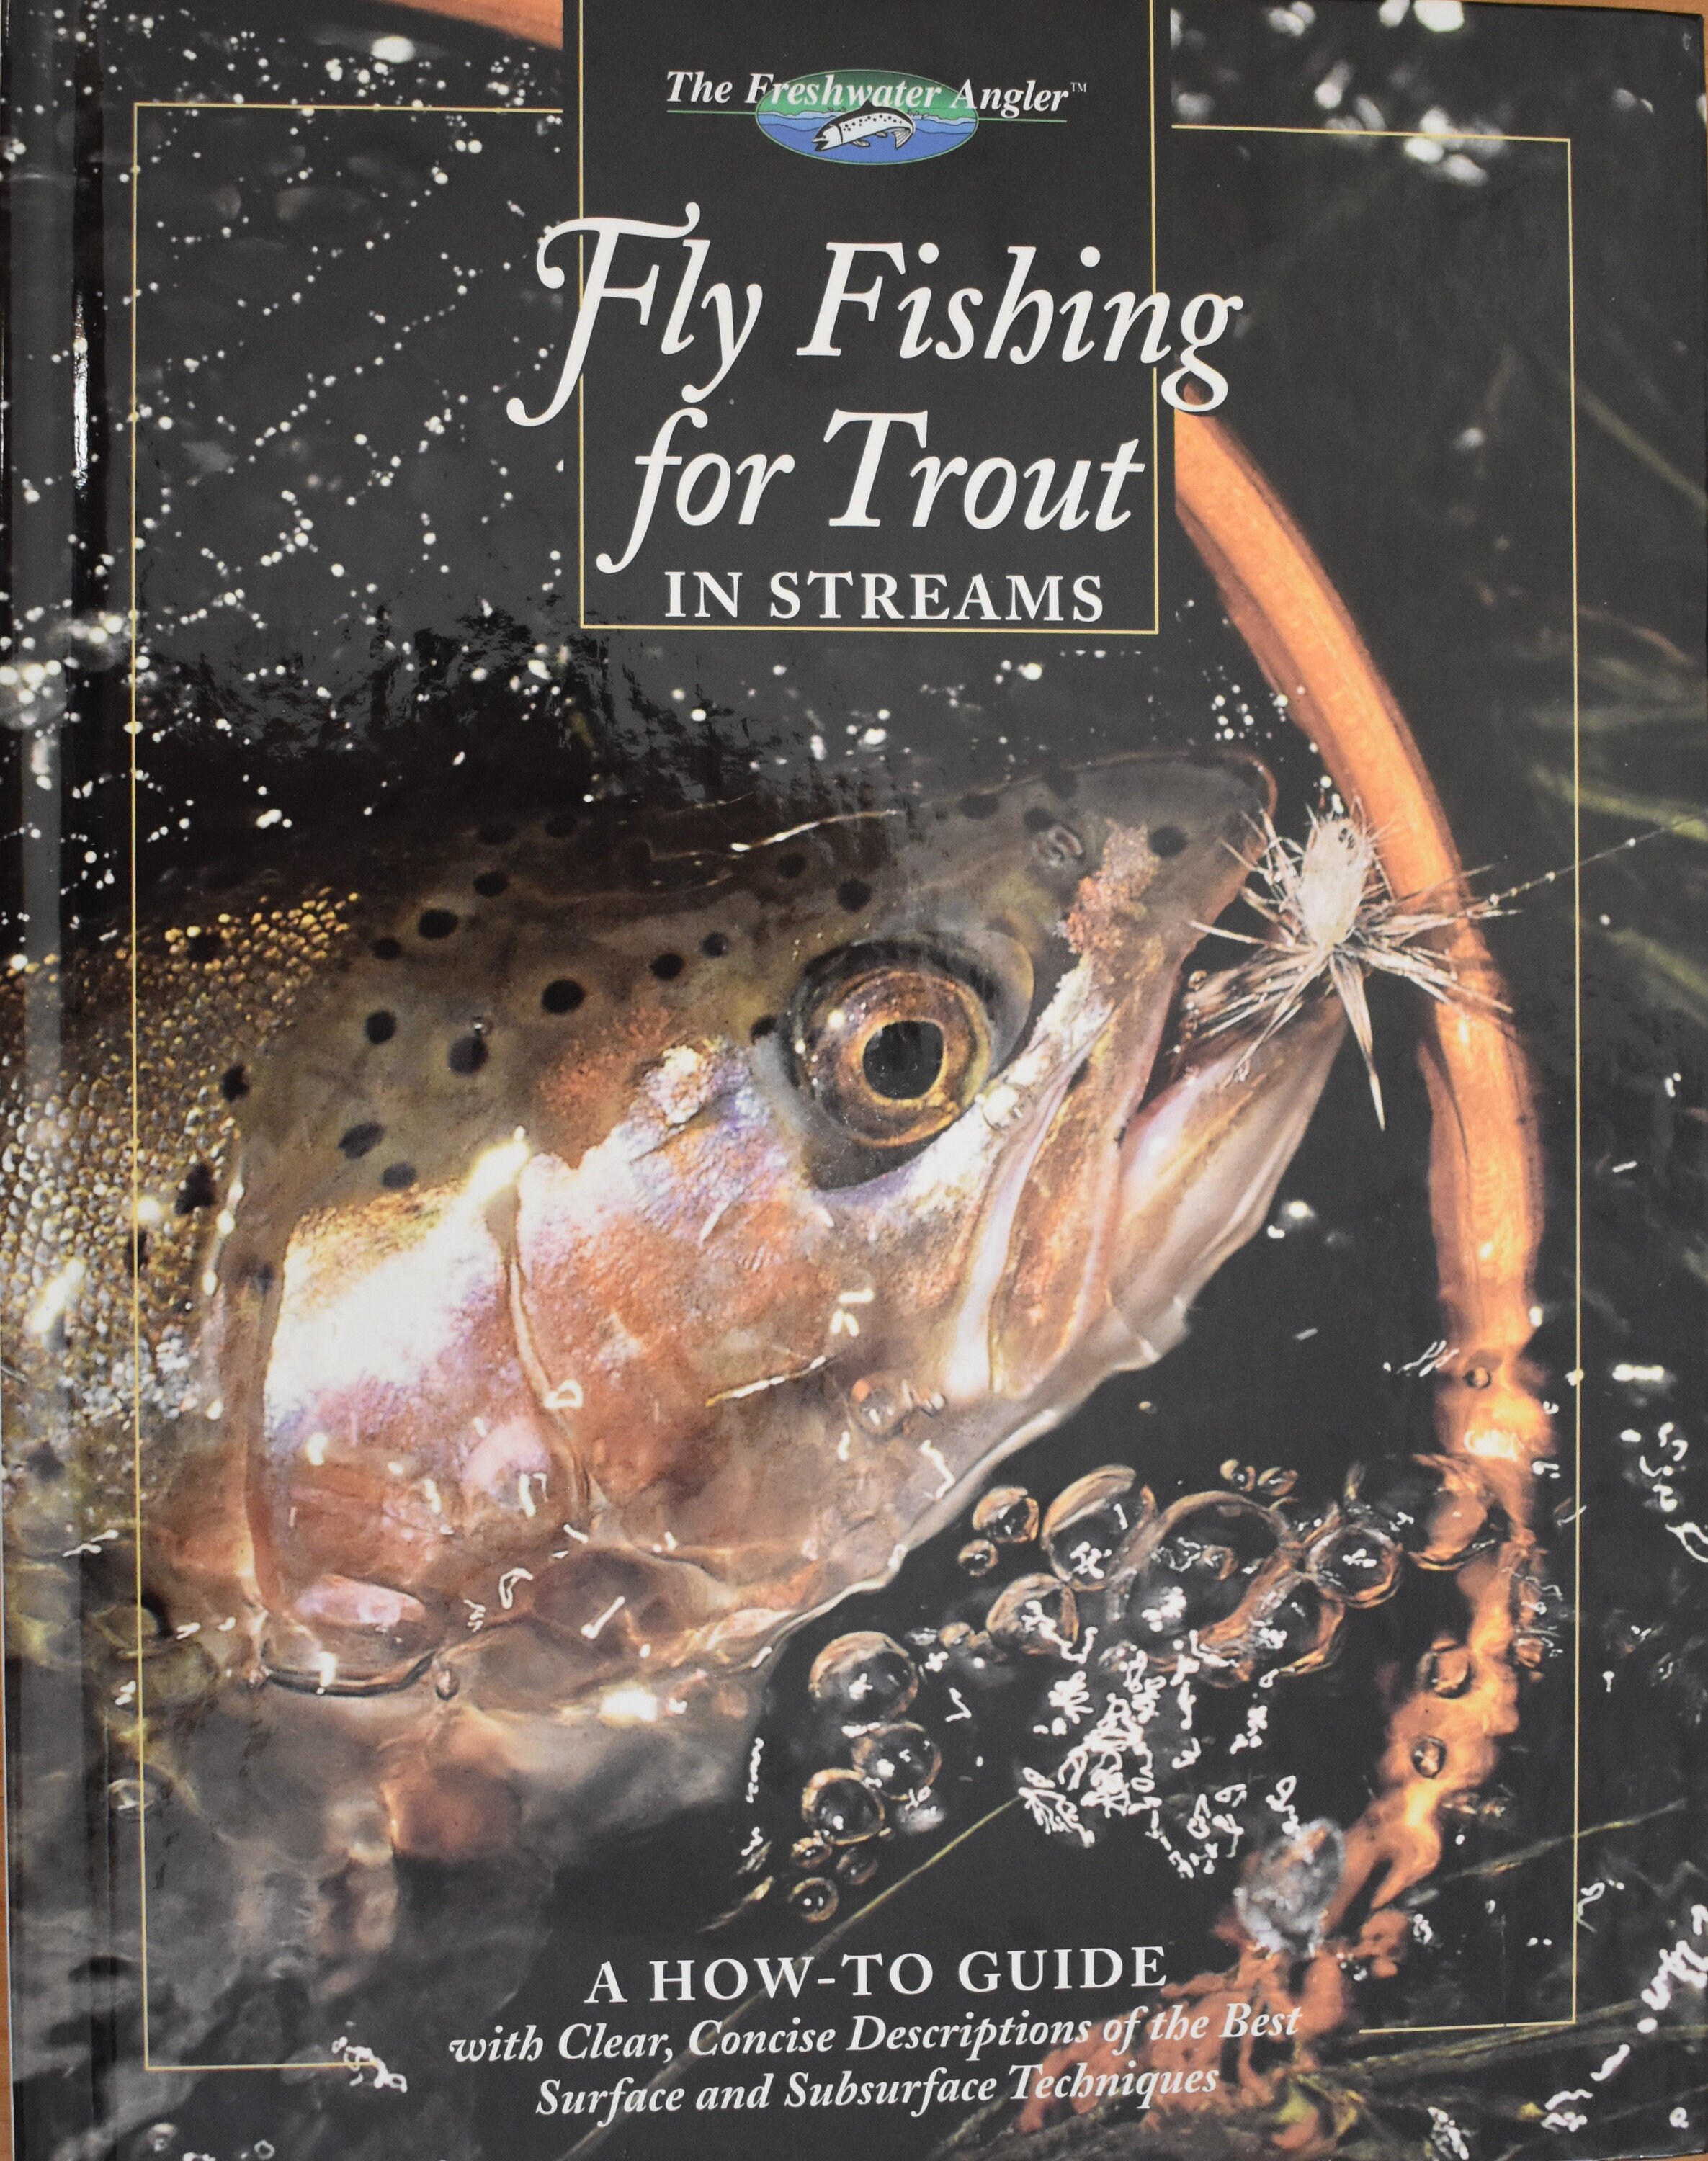 Fly Fishing for Trout in Streams: A How-To Guide (The Freshwater Angler):  Editors of Creative Publishing: 9780865730731: : Books